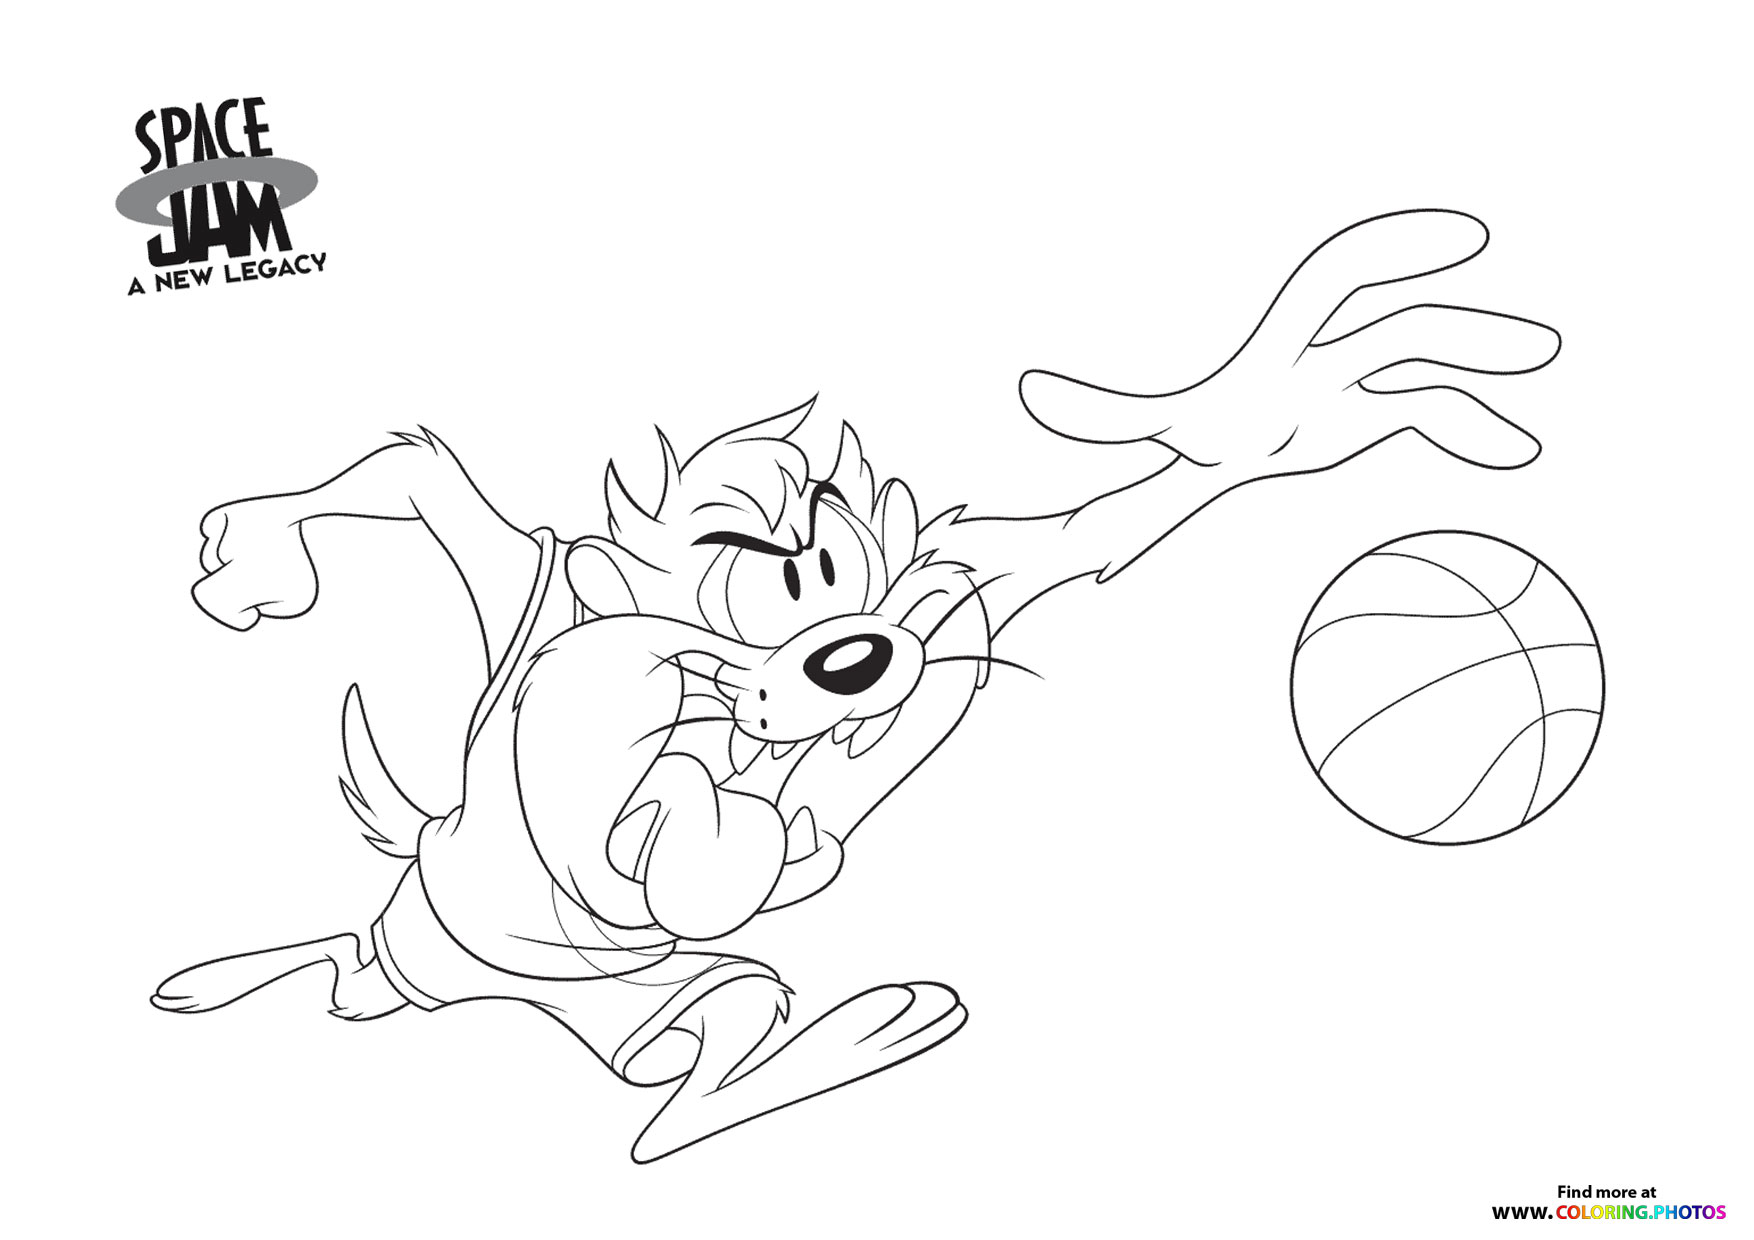 taz space jam a new legacy coloring pages for kids